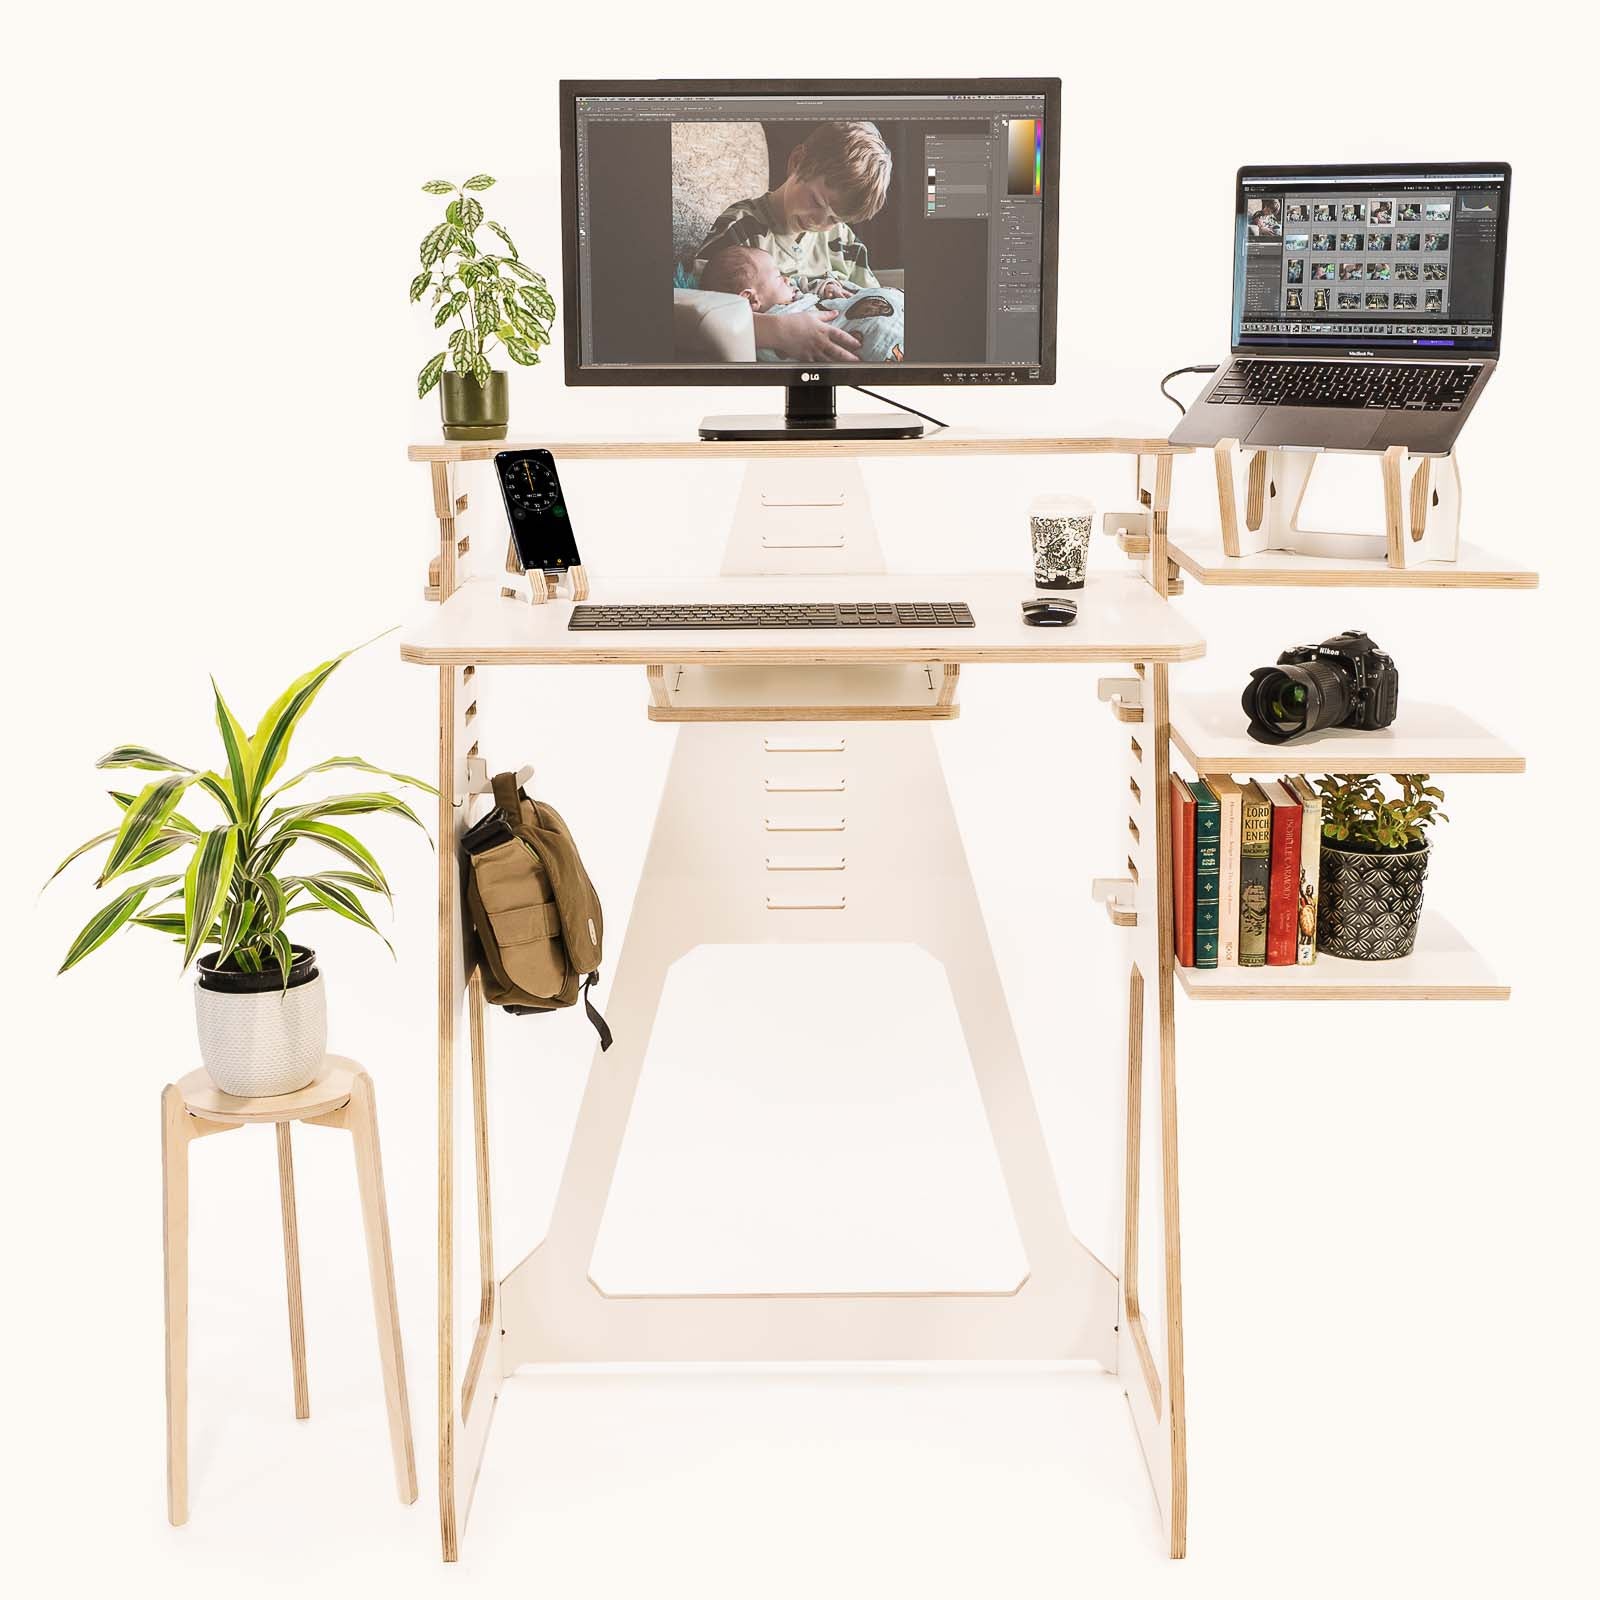 Creating a Functional Standing Desk Home Office Layout - The Standing Desk